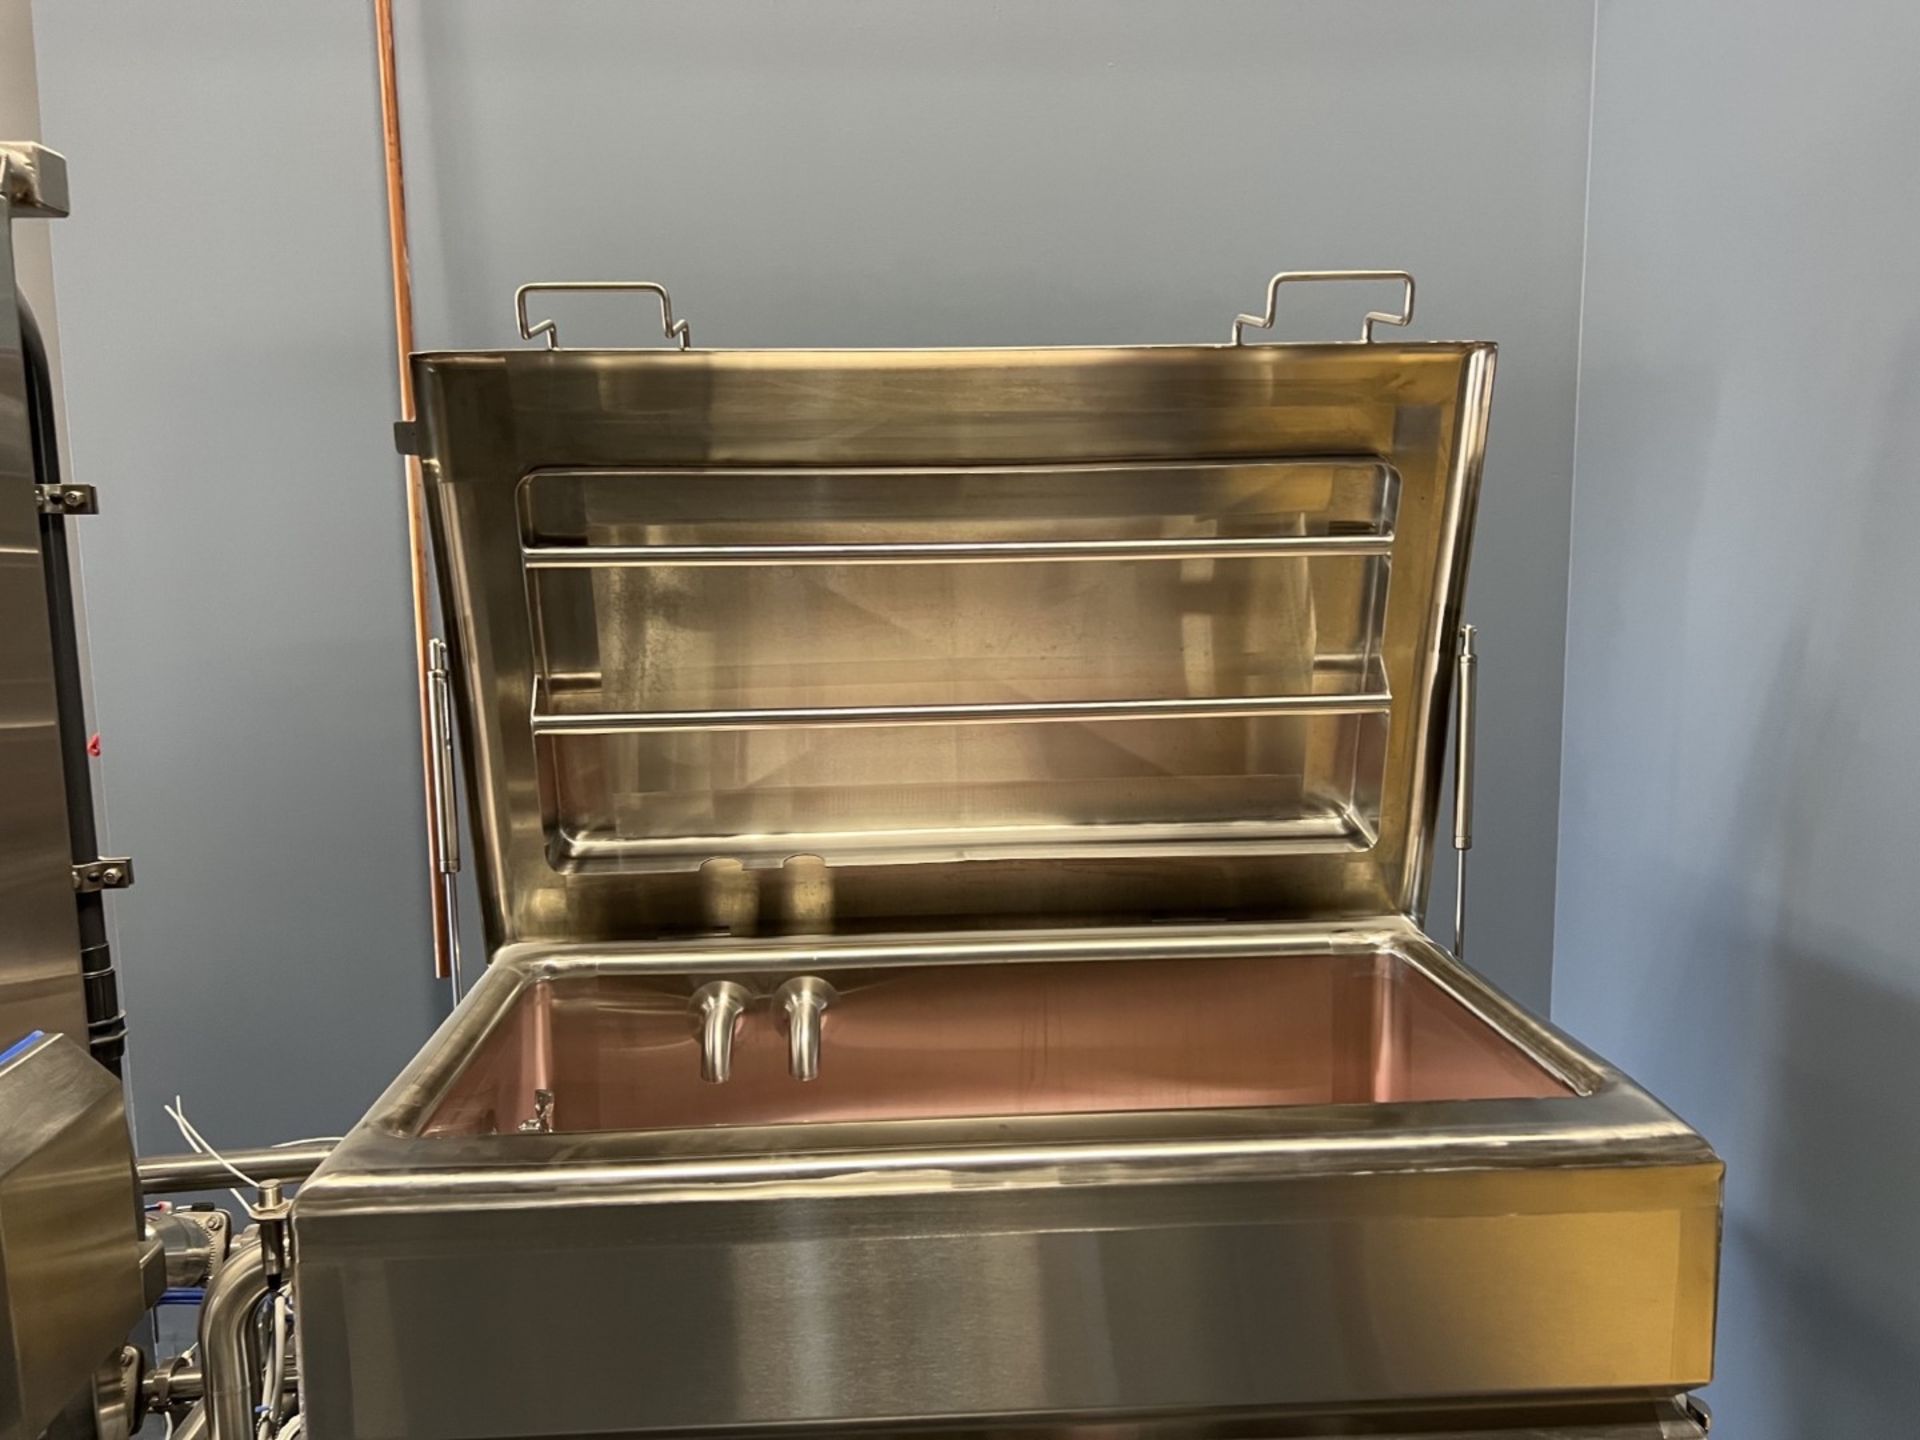 2019 Un-Used Sani-Matic COP Immersion Parts Washer - All Stainless Steel Construction - Image 5 of 8